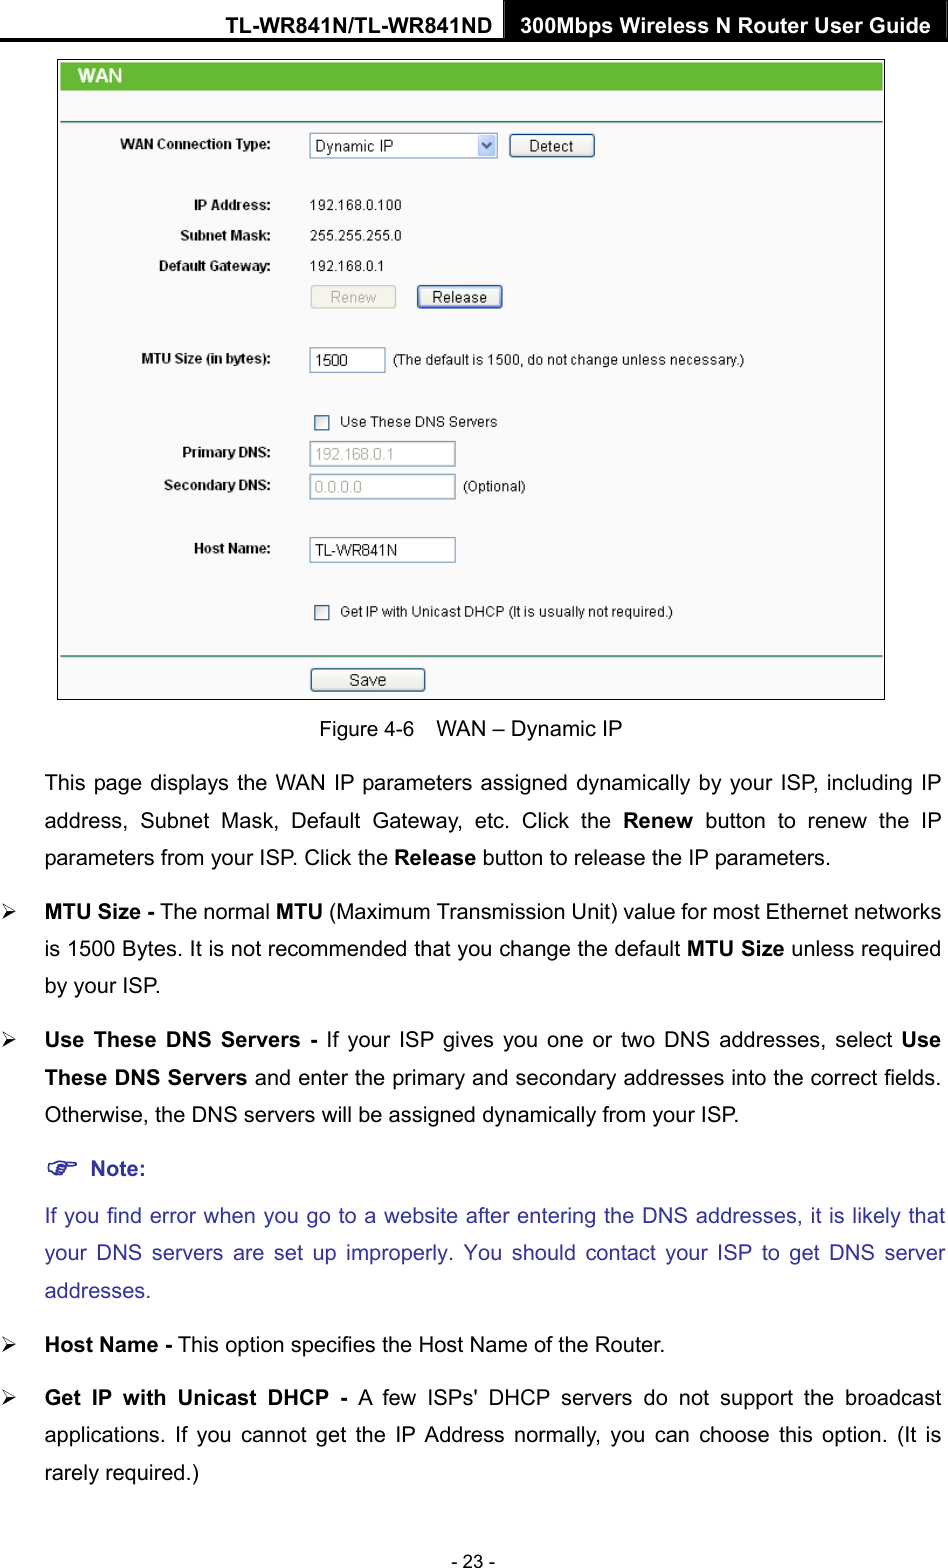 TL-WR841N/TL-WR841ND 300Mbps Wireless N Router User Guide - 23 -  Figure 4-6    WAN – Dynamic IP This page displays the WAN IP parameters assigned dynamically by your ISP, including IP address, Subnet Mask, Default Gateway, etc. Click the Renew button to renew the IP parameters from your ISP. Click the Release button to release the IP parameters. ¾ MTU Size - The normal MTU (Maximum Transmission Unit) value for most Ethernet networks is 1500 Bytes. It is not recommended that you change the default MTU Size unless required by your ISP.   ¾ Use These DNS Servers - If your ISP gives you one or two DNS addresses, select Use These DNS Servers and enter the primary and secondary addresses into the correct fields. Otherwise, the DNS servers will be assigned dynamically from your ISP.   ) Note: If you find error when you go to a website after entering the DNS addresses, it is likely that your DNS servers are set up improperly. You should contact your ISP to get DNS server addresses.  ¾ Host Name - This option specifies the Host Name of the Router. ¾ Get IP with Unicast DHCP - A few ISPs&apos; DHCP servers do not support the broadcast applications. If you cannot get the IP Address normally, you can choose this option. (It is rarely required.) 